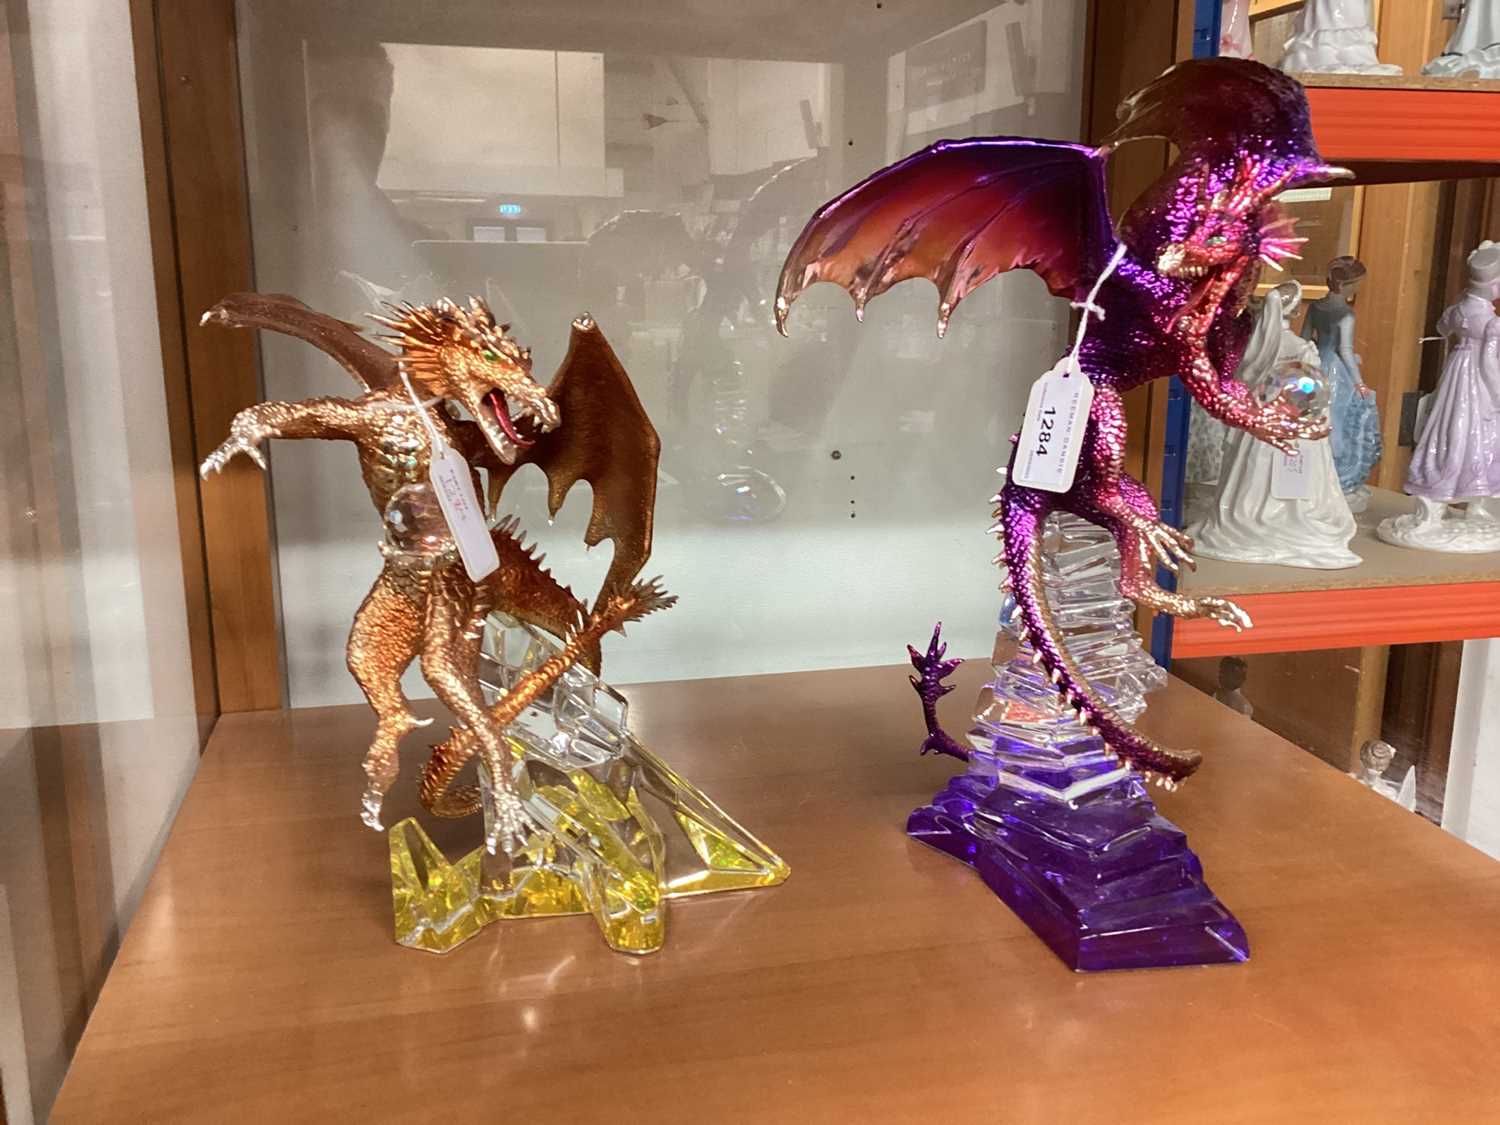 Two Franklin Mint limited edition Dragon sculptures designed by Michael Whelan